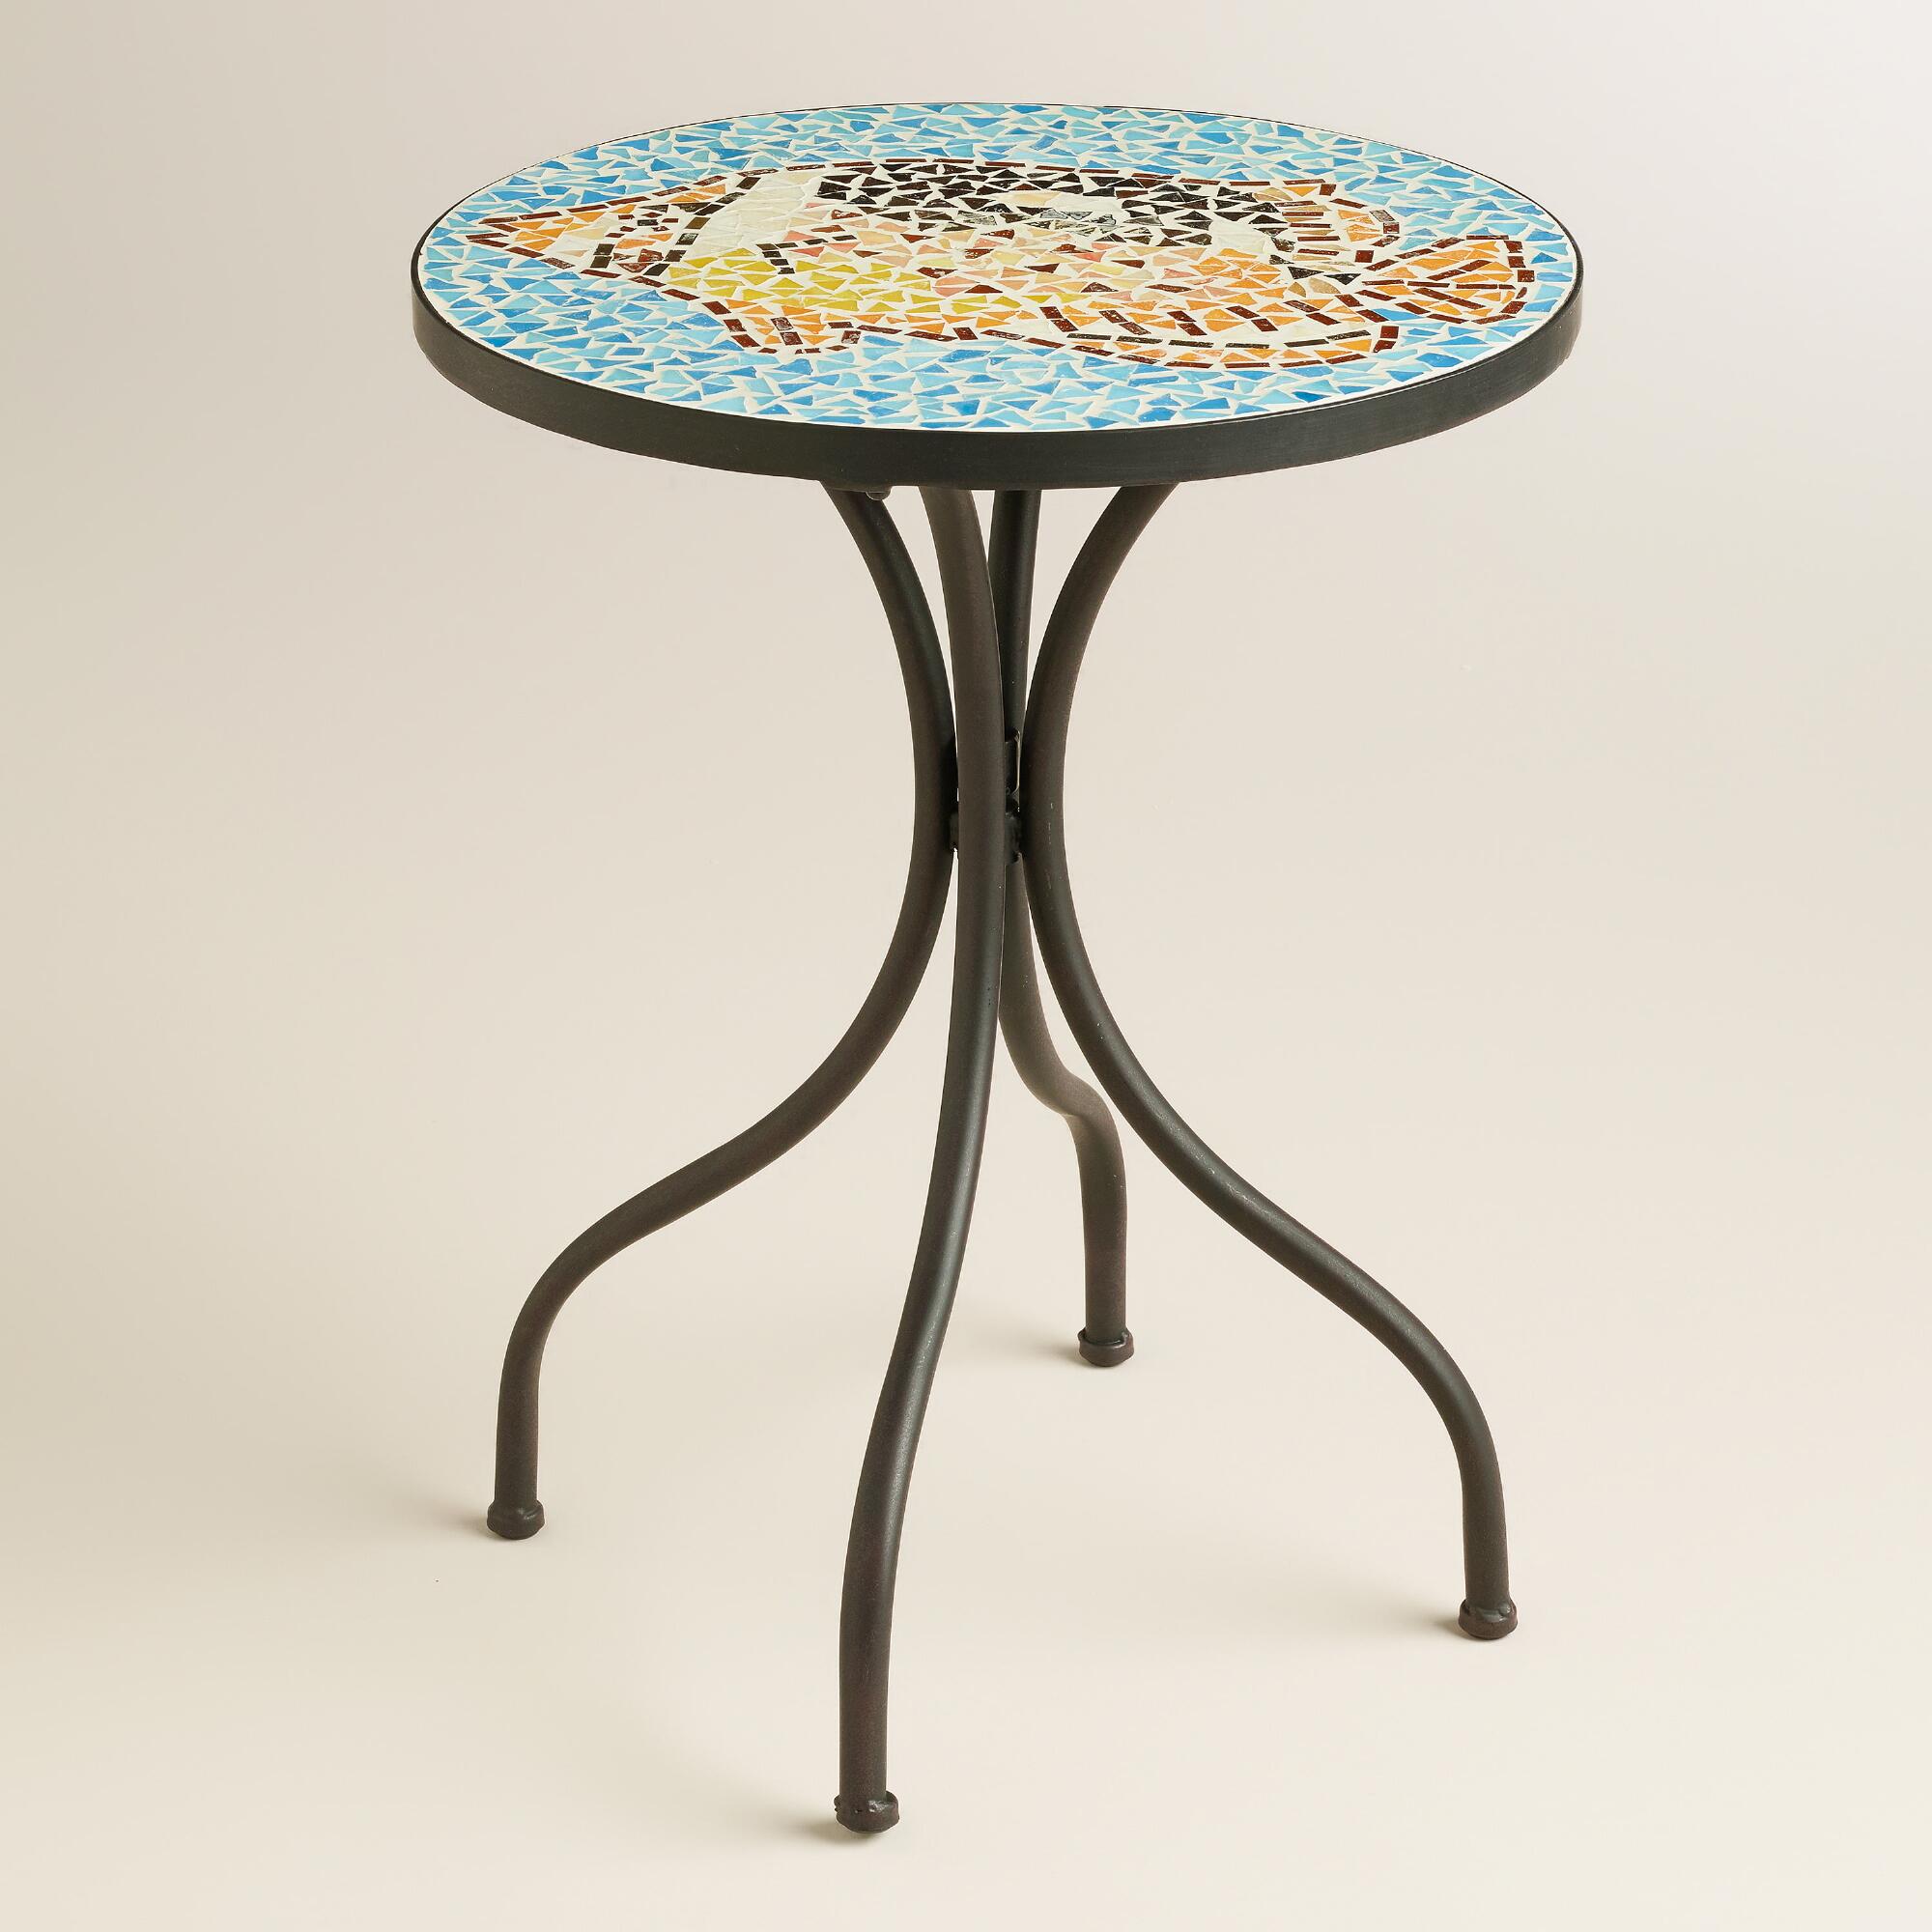 fish mosaic cadiz accent table world market with storage kohls target vases union jack furniture butler desk acrylic coffee tray set three glass tables slipper chair bedside ideas